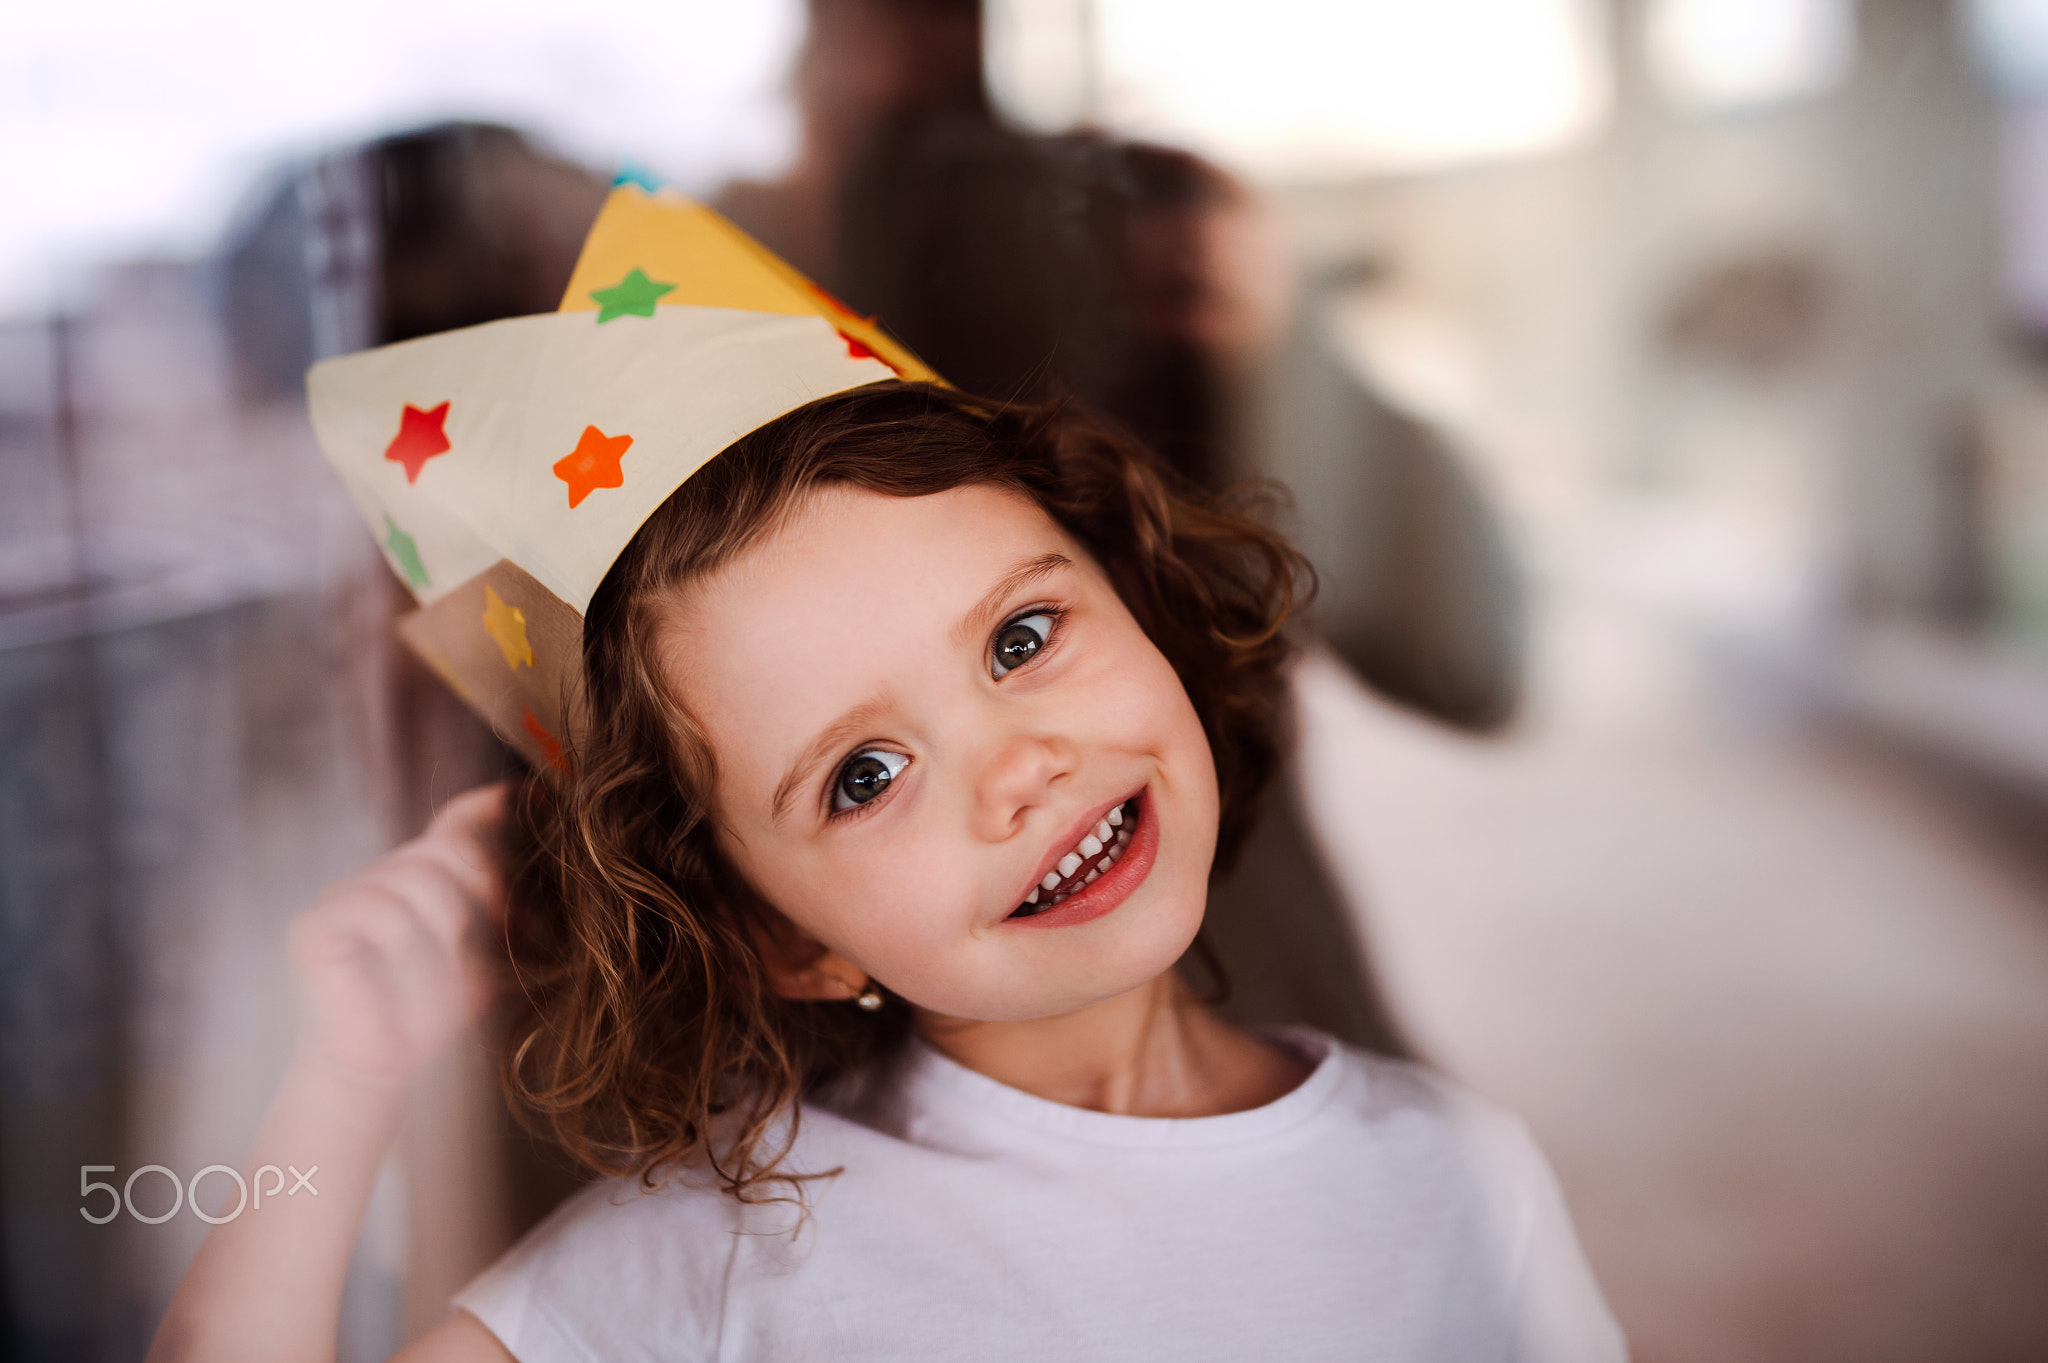 A small girl with a paper crown at home, looking at camera through glass.